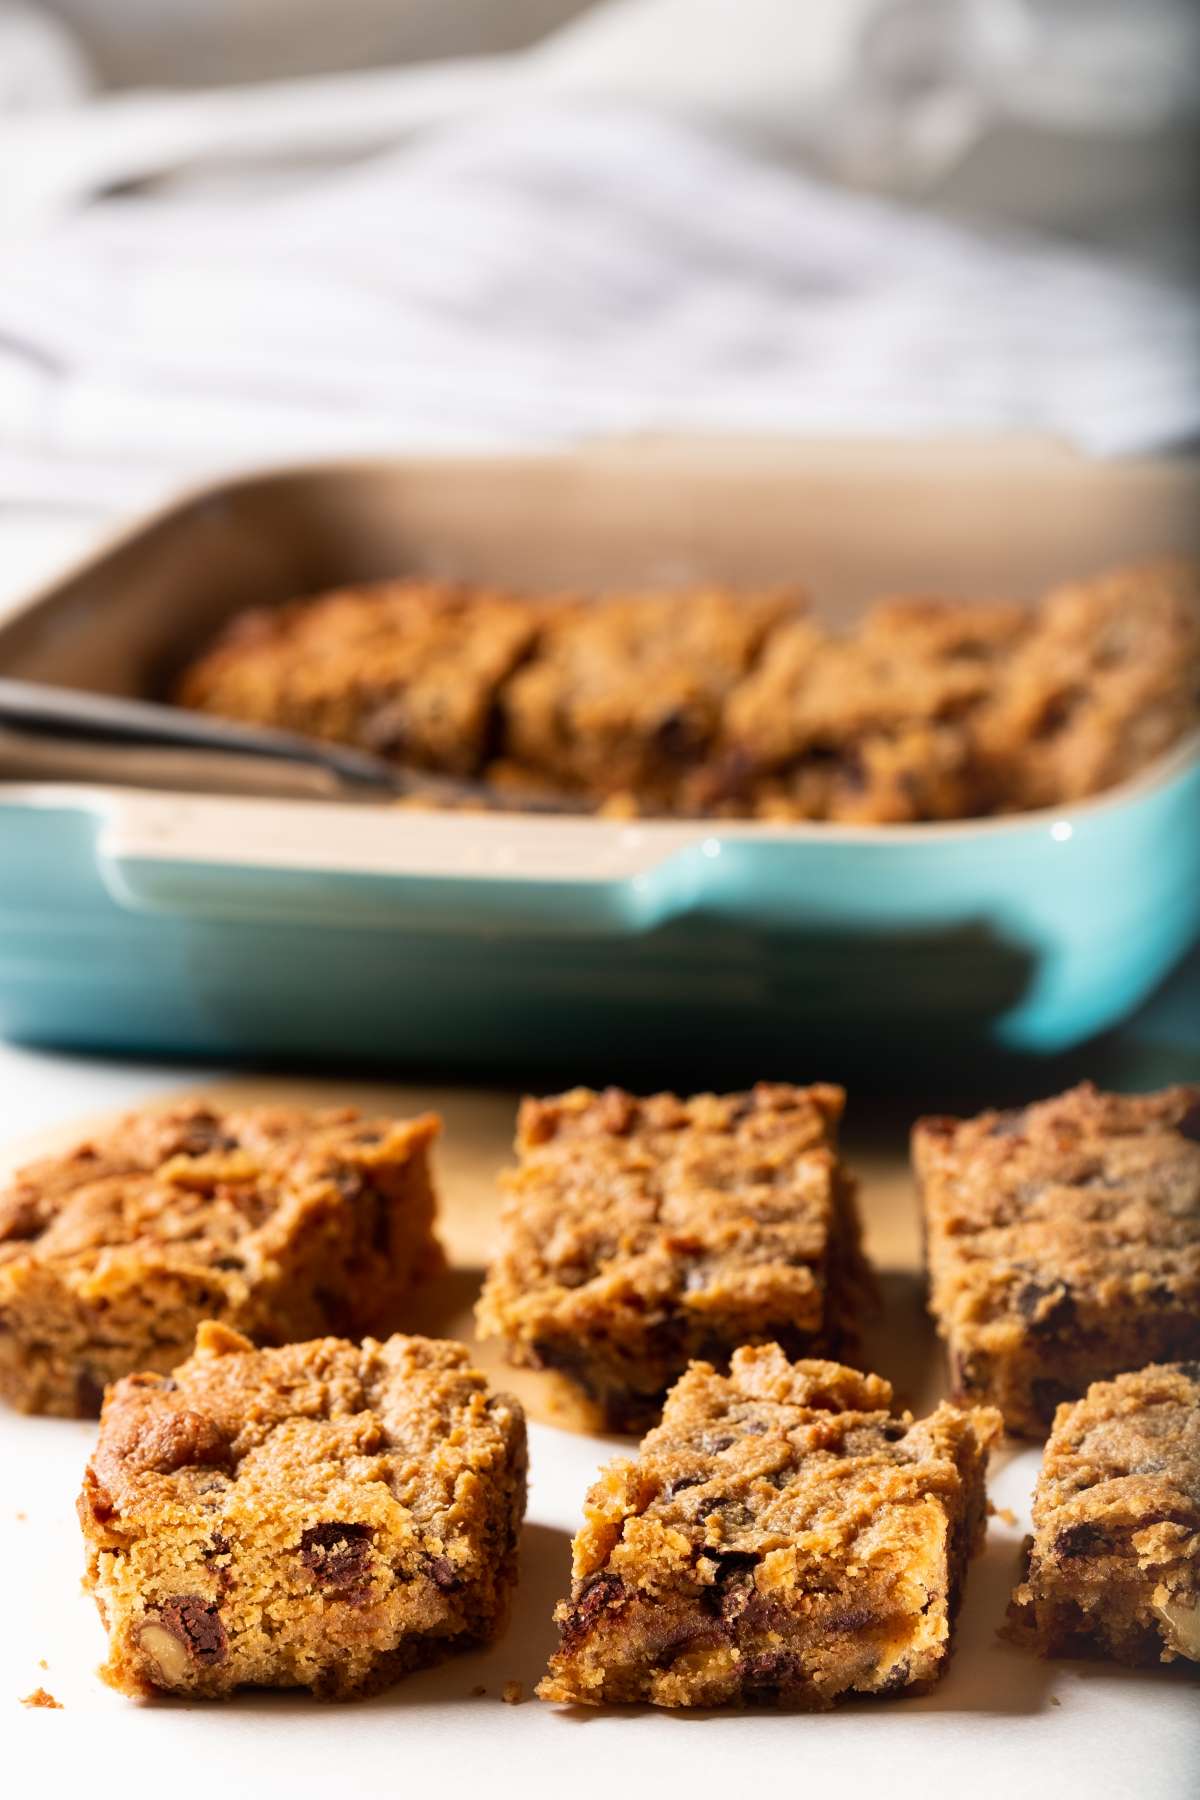 BROWN BUTTER BLONDIES WITH CHOCOLATE CHIPS AND WALNUTS